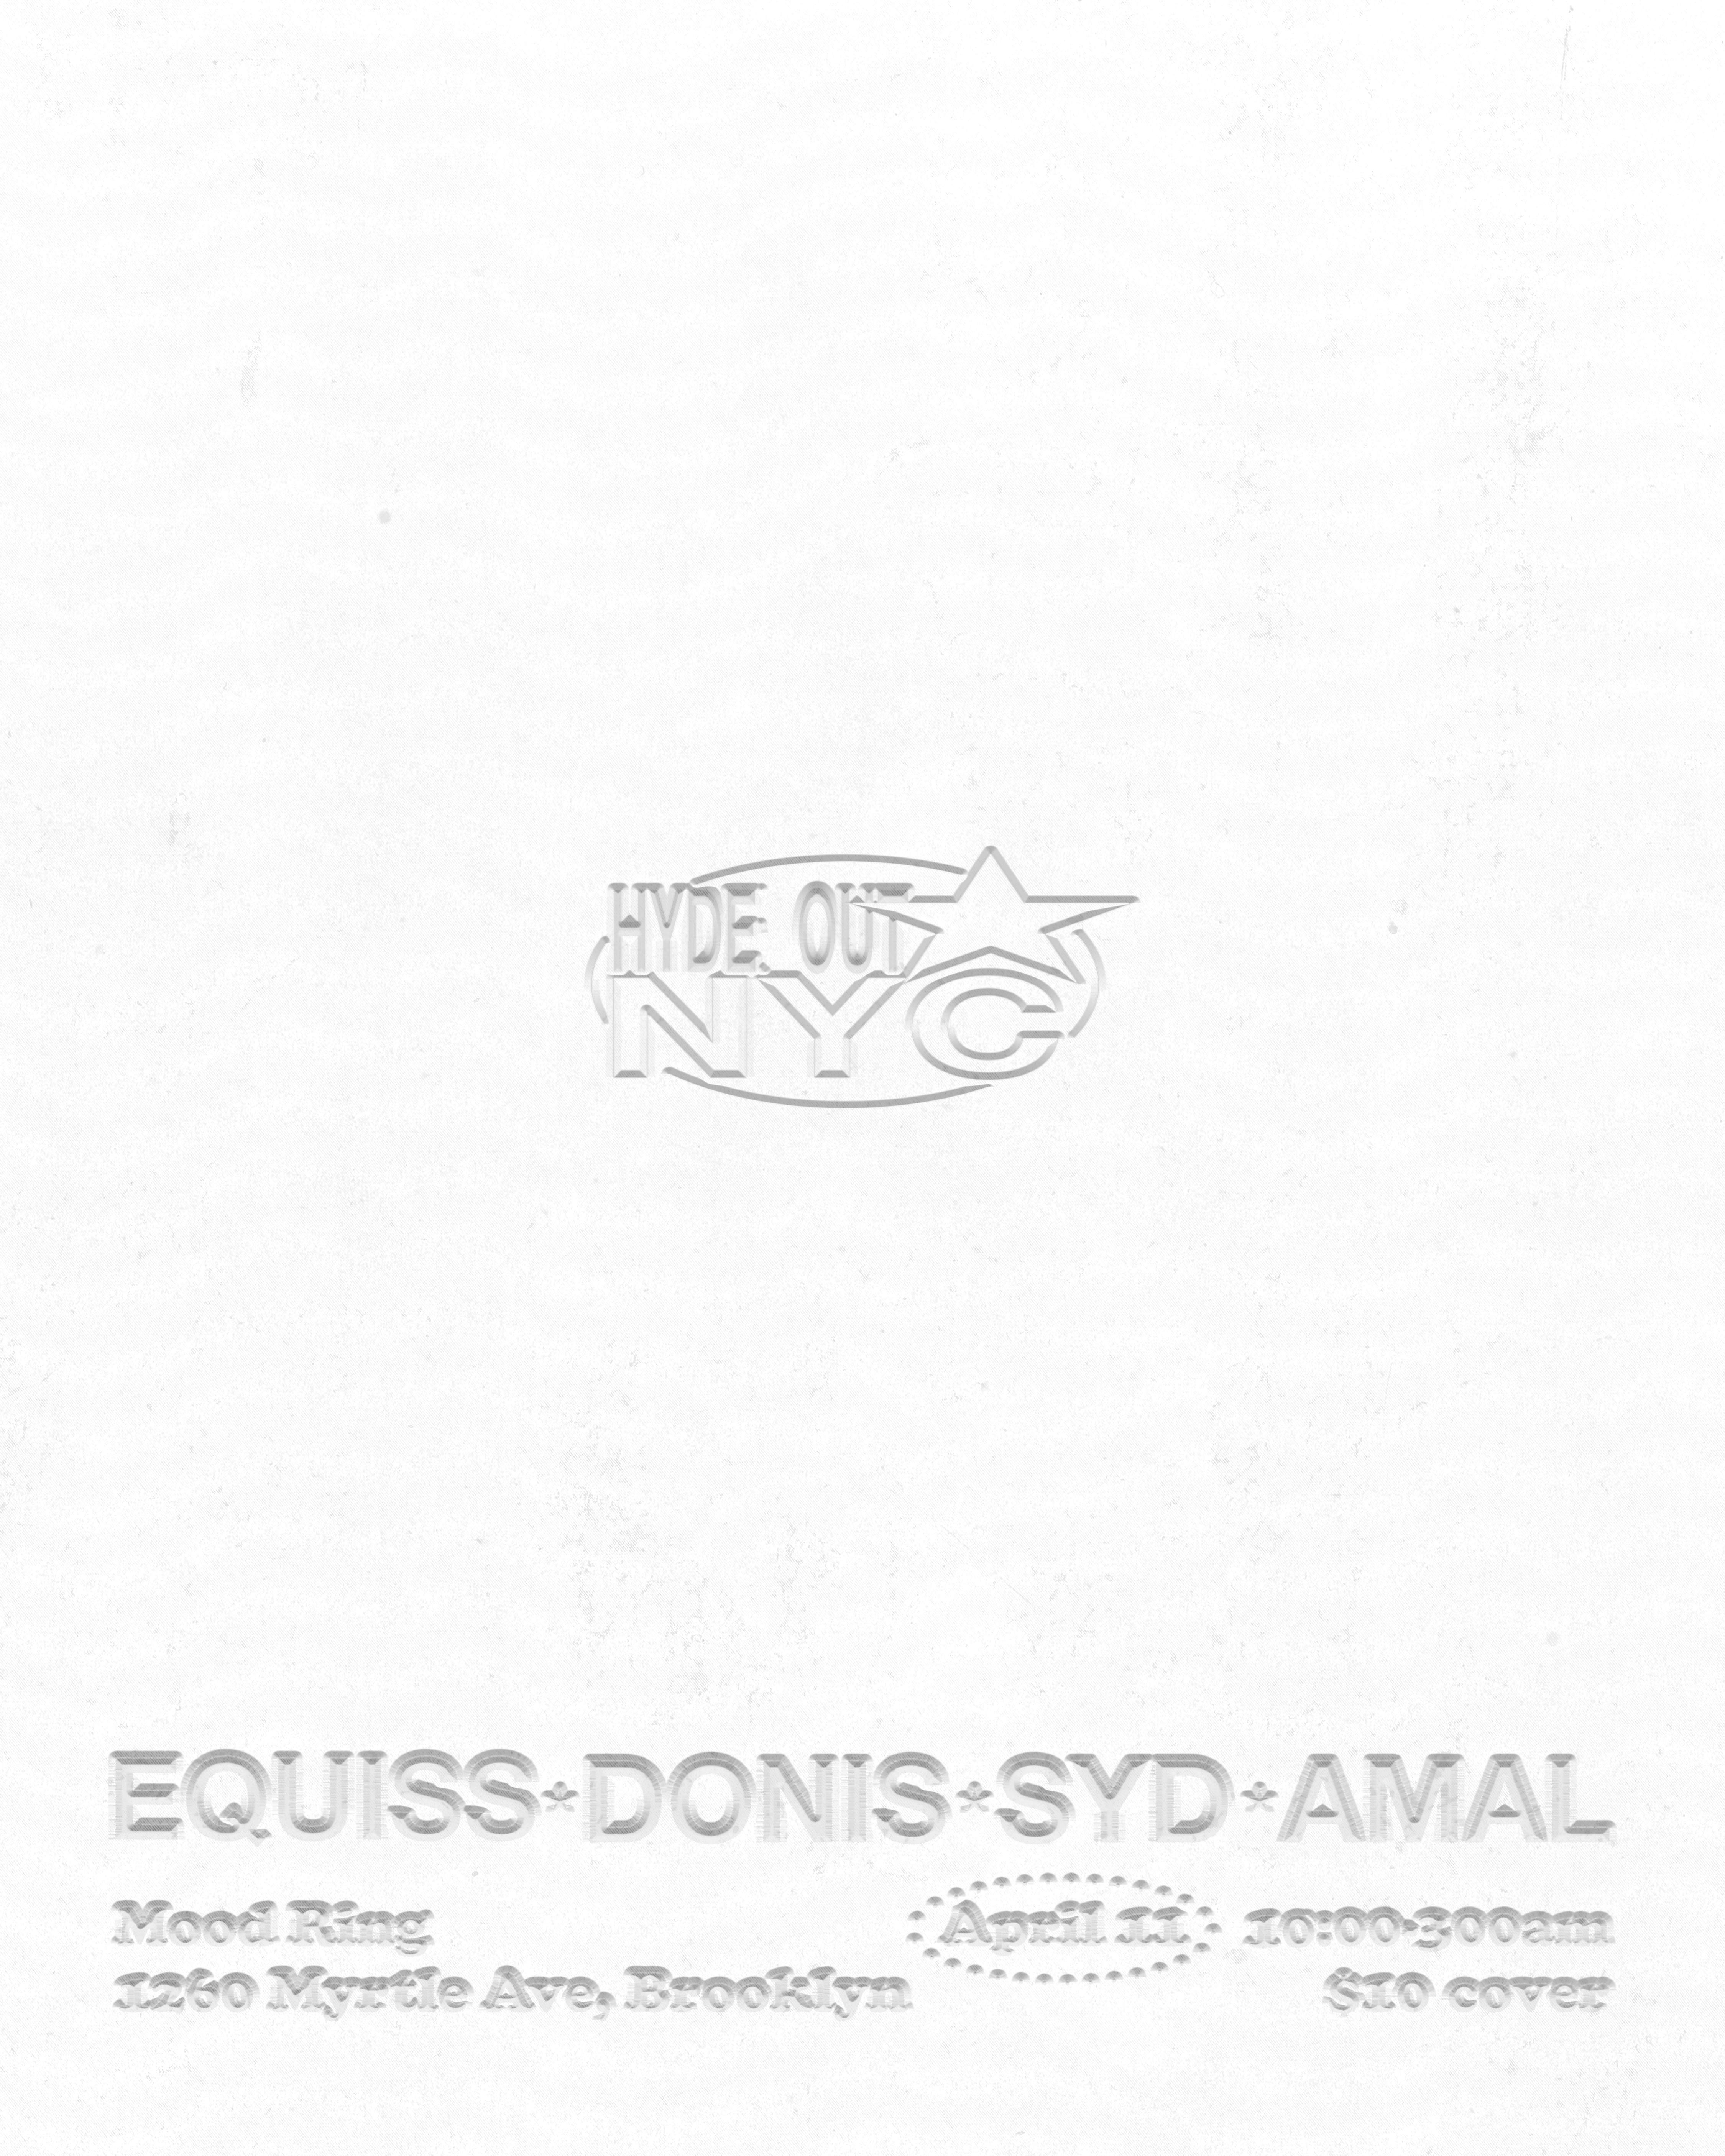 HYDEOUT NYC: EQUISS, Donis, Amal, syd - Página frontal